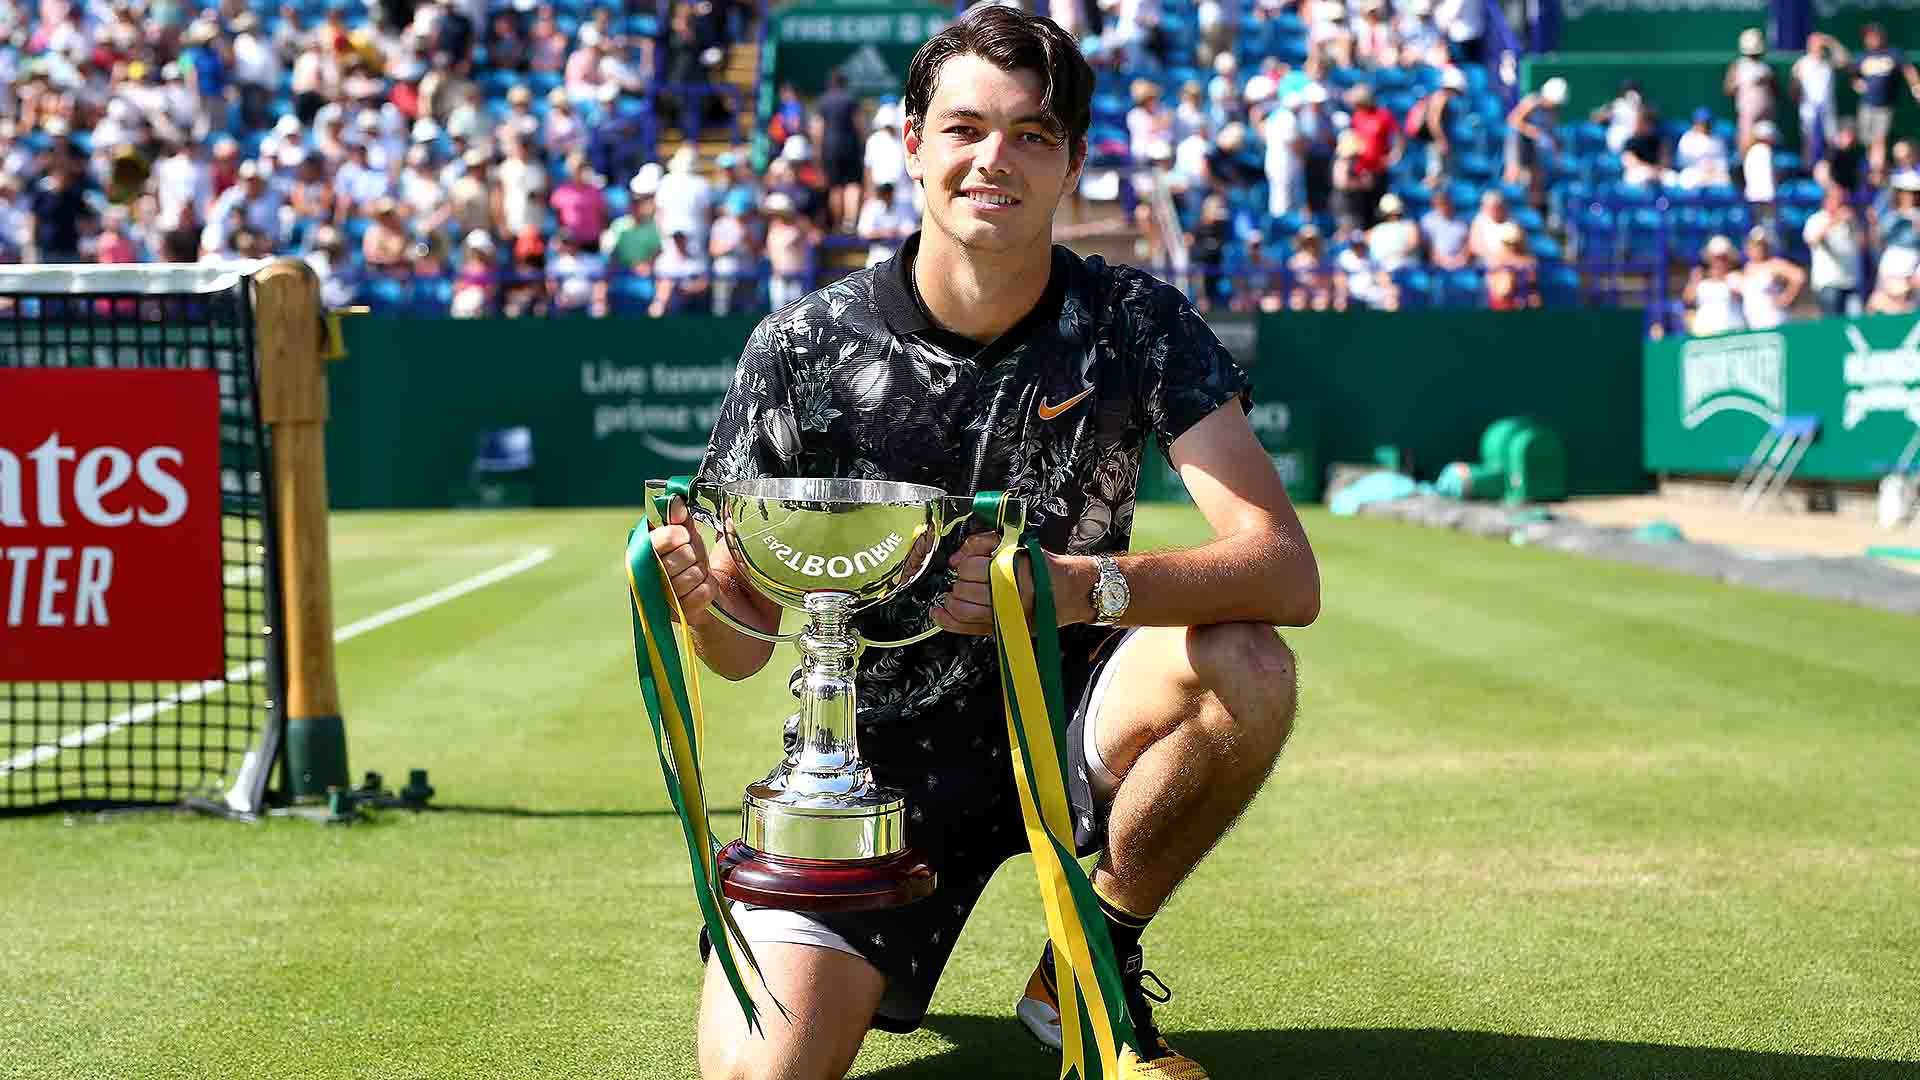 Taylor Fritz Holding His Trophy Background